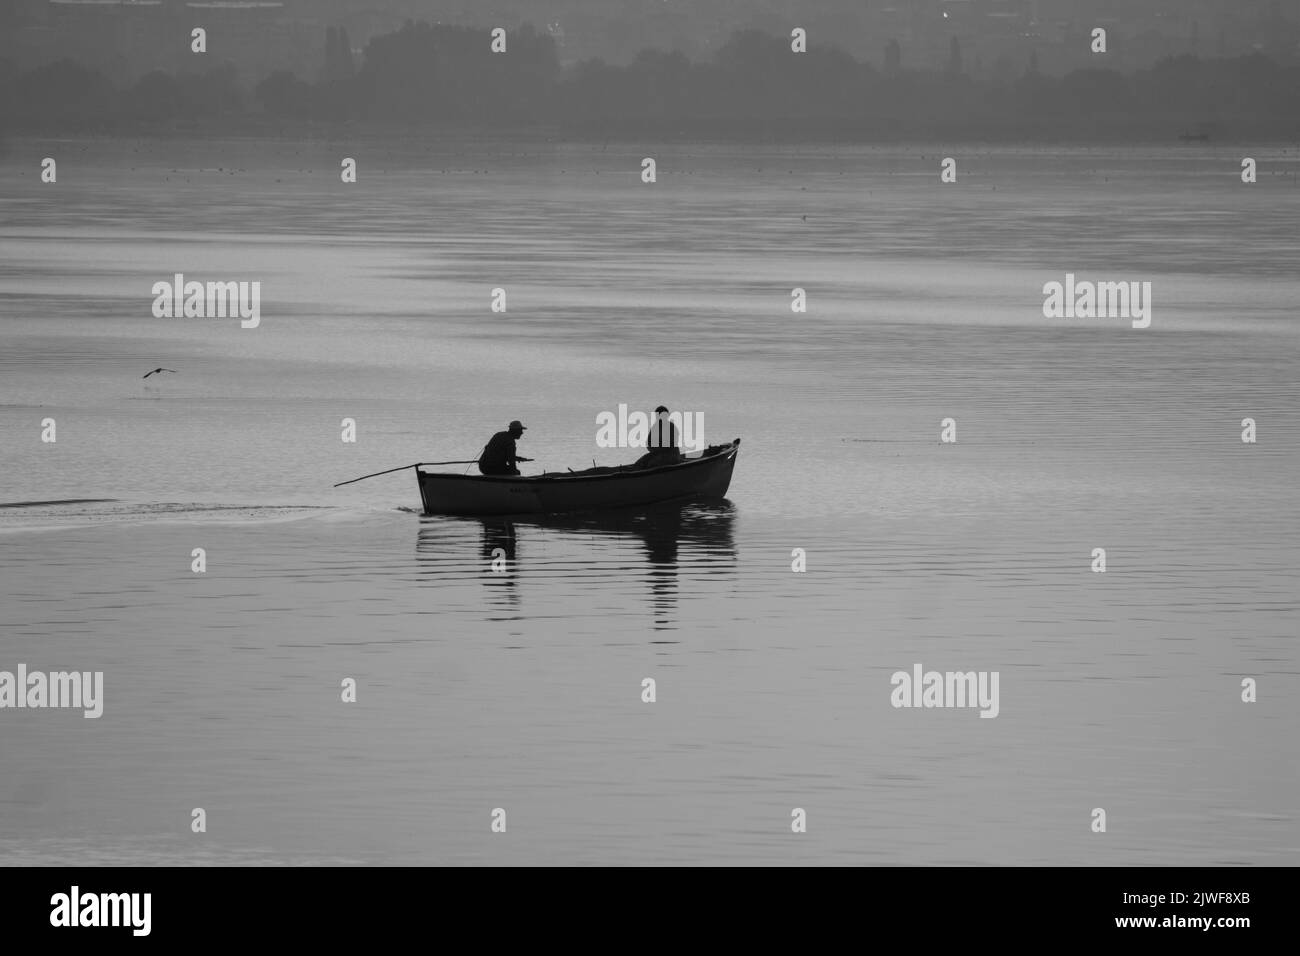 Golyazi, Bursa - August 2022: Fishermen in the lake go fishing with their boats in the early morning, selective focus Stock Photo